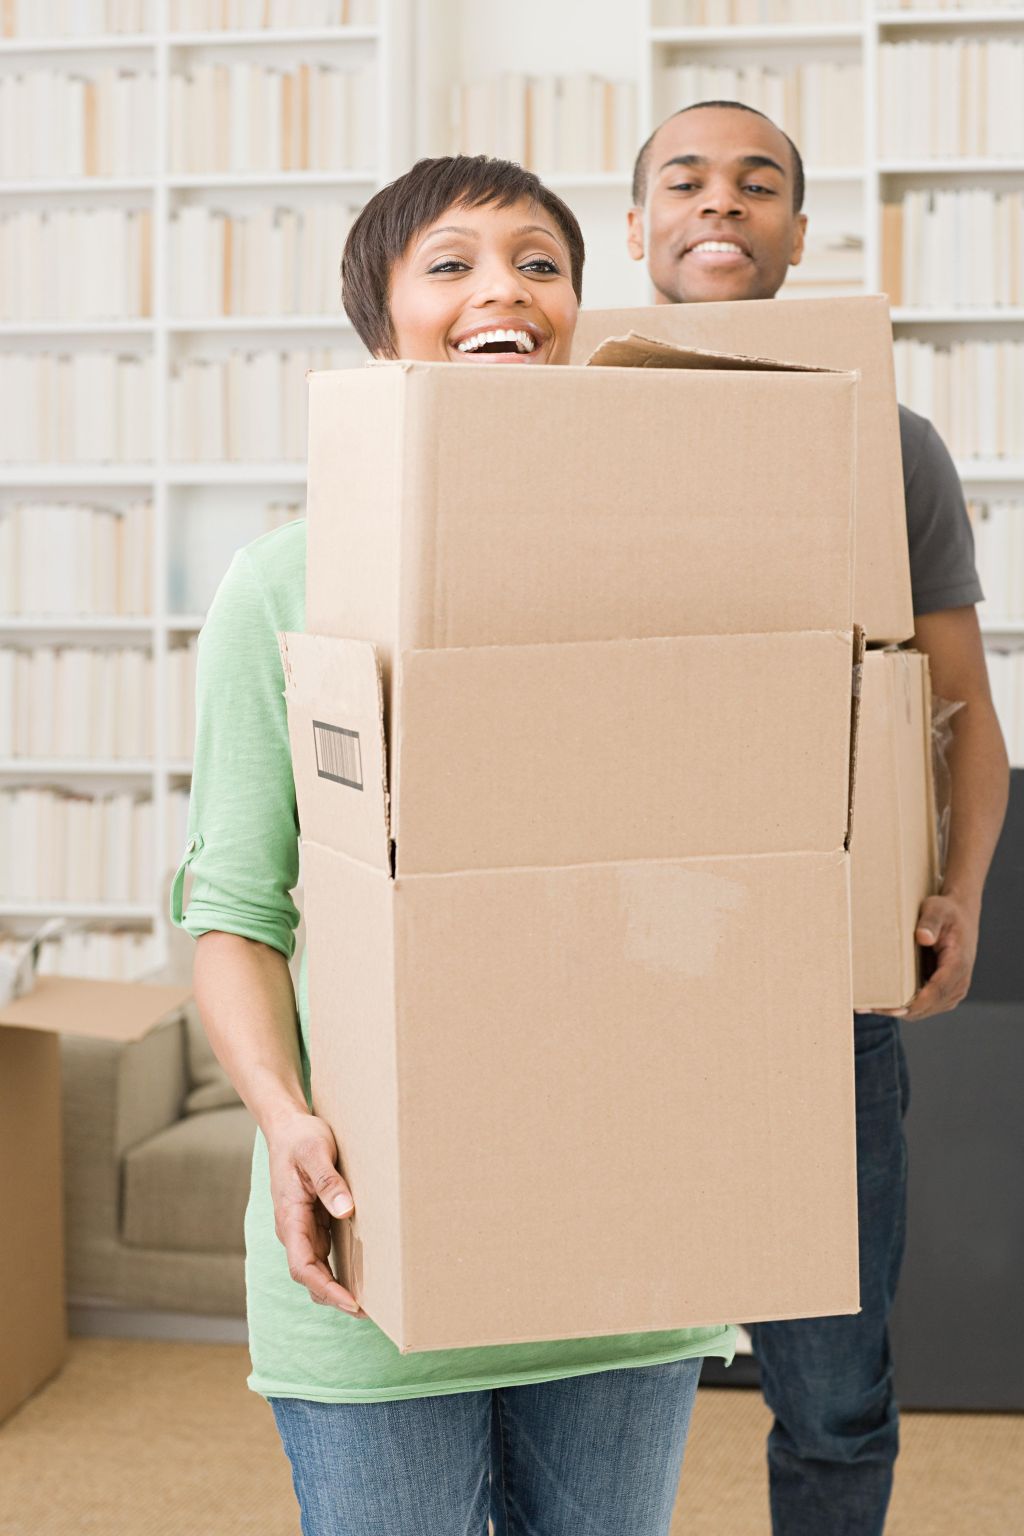 Couple with cardboard boxes